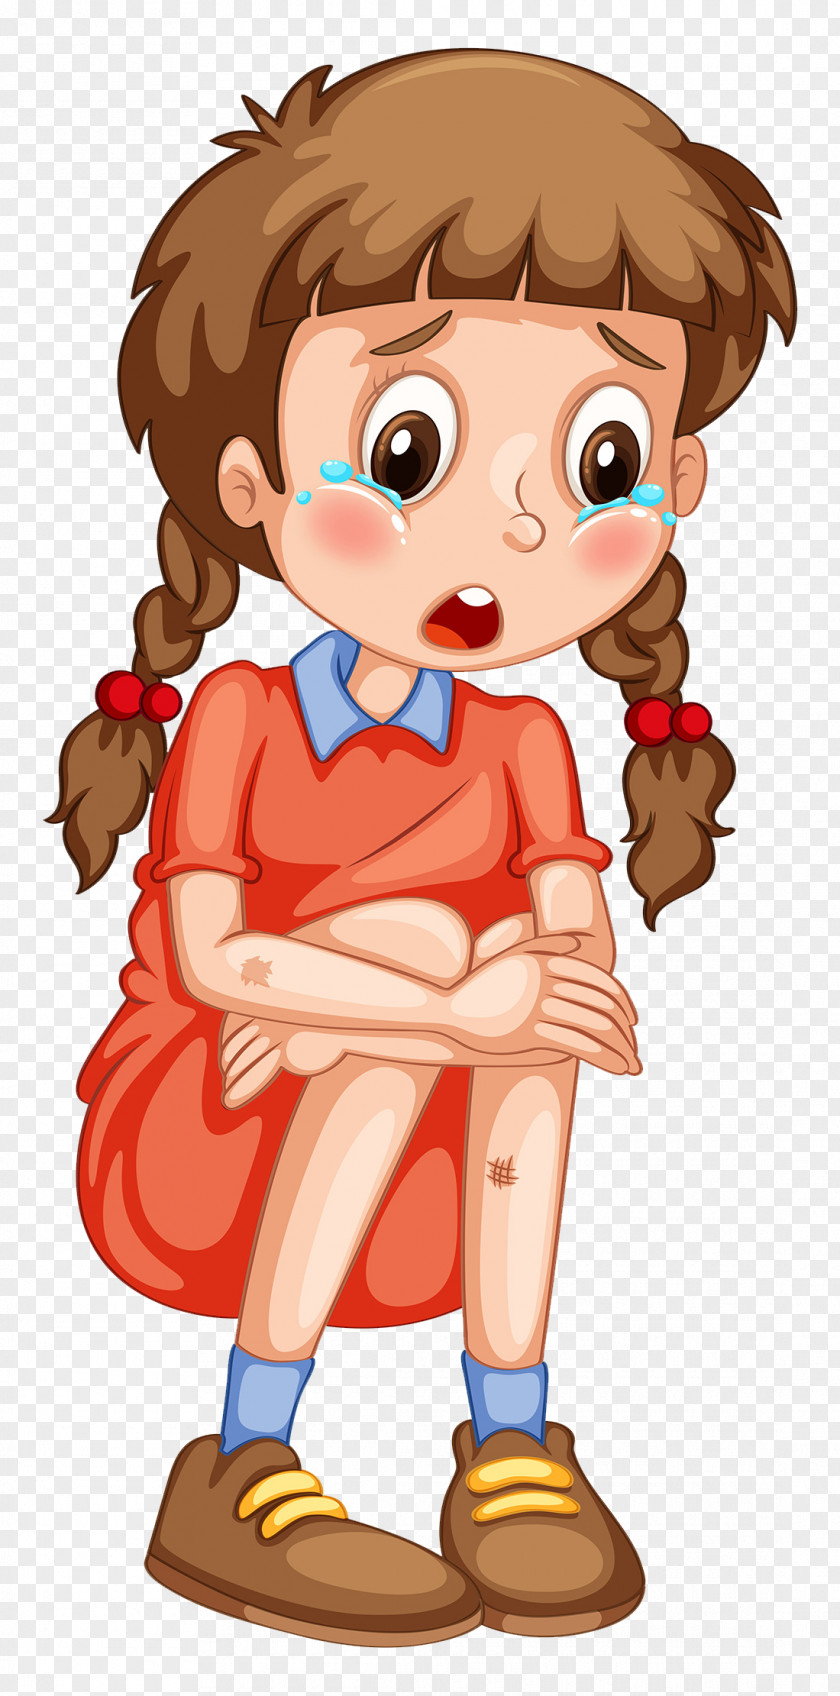 The Child Is Crying Cartoon Stock Photography Illustration PNG